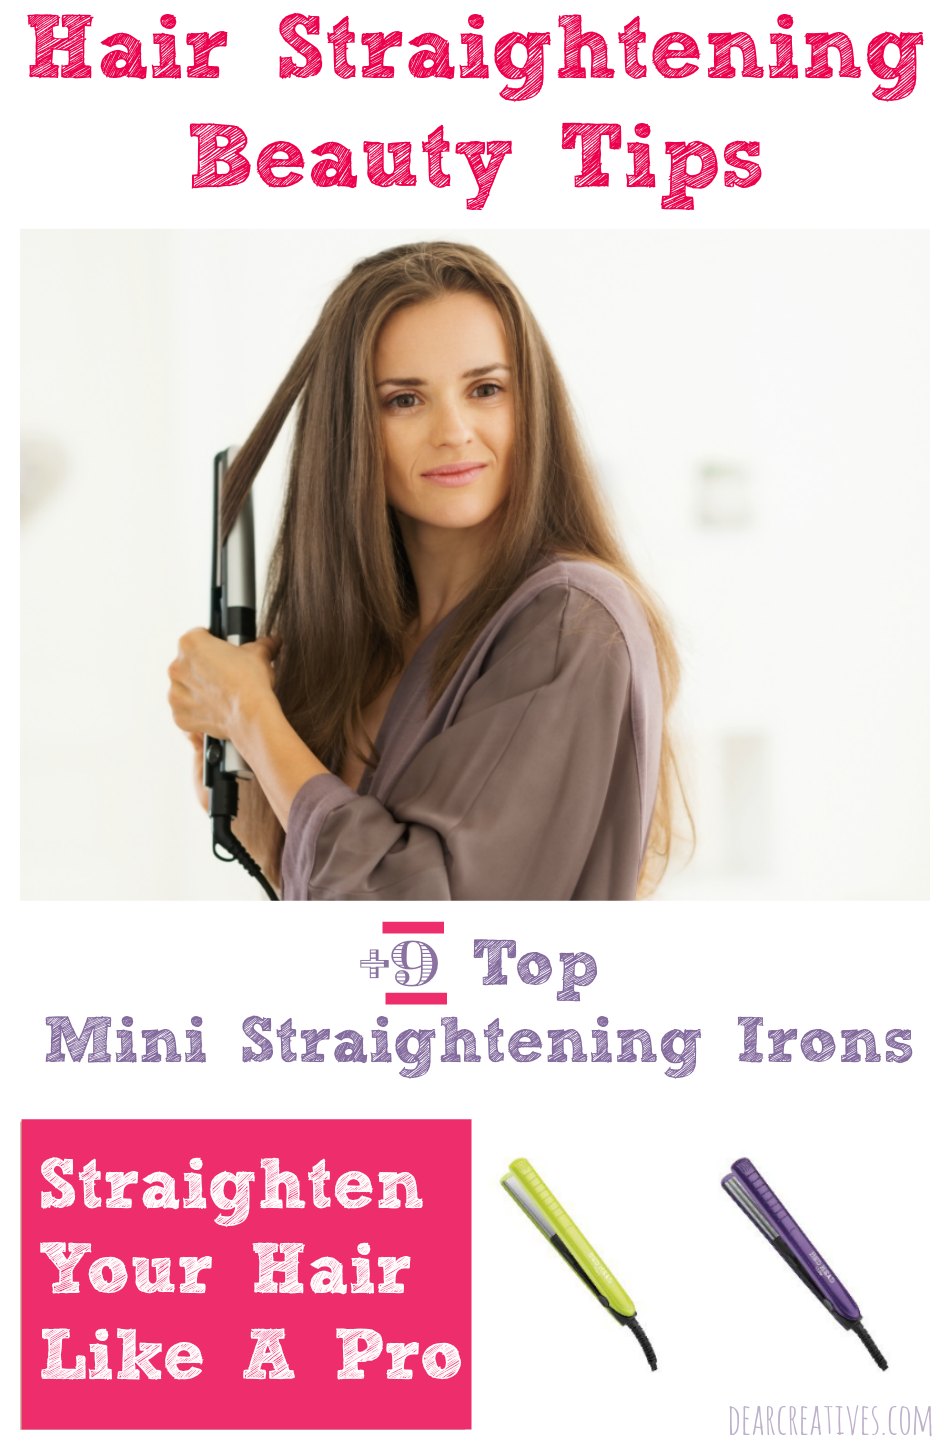 Beauty Tips How To Straighten Your Hair Like A Pro Plus 9 of the best mini straightening irons